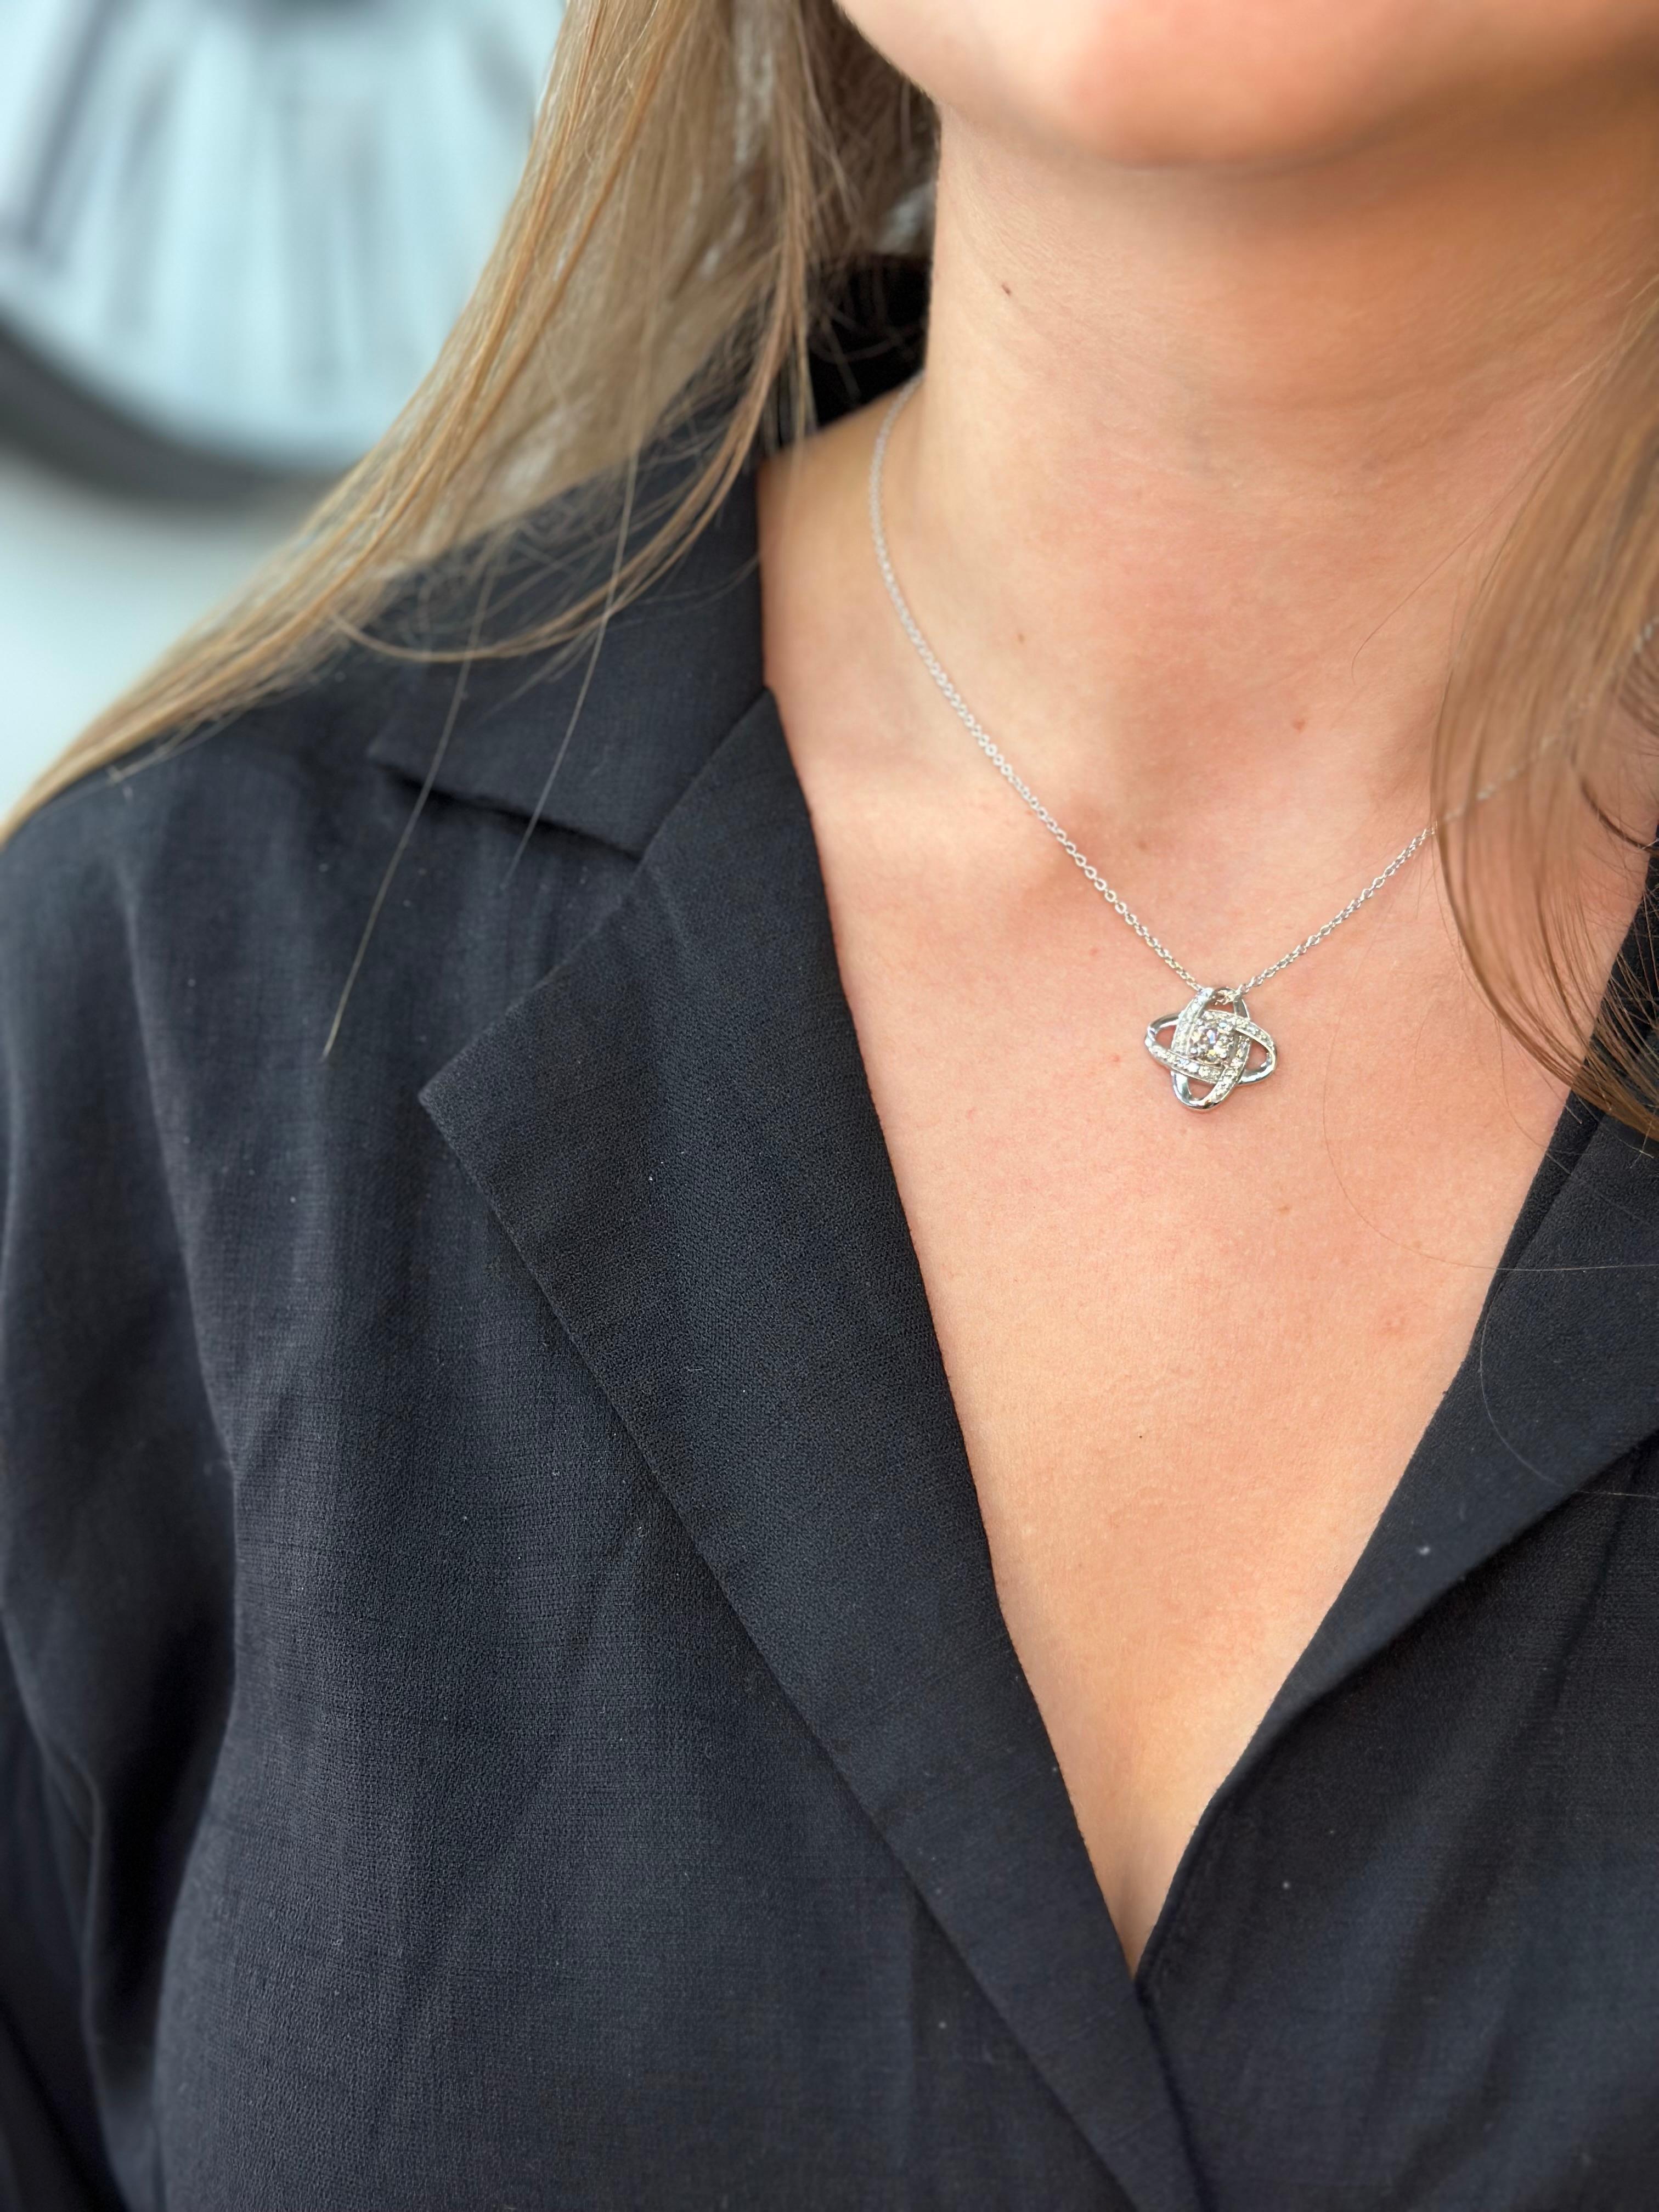 Introducing our stunning Infinity Diamond Solitaire Pendant in 14K White Gold! This pendant is designed to turn heads and leave a lasting impression. 

It features a .75 round-cut diamond center stone in an infinity knot design in 14K White Gold.